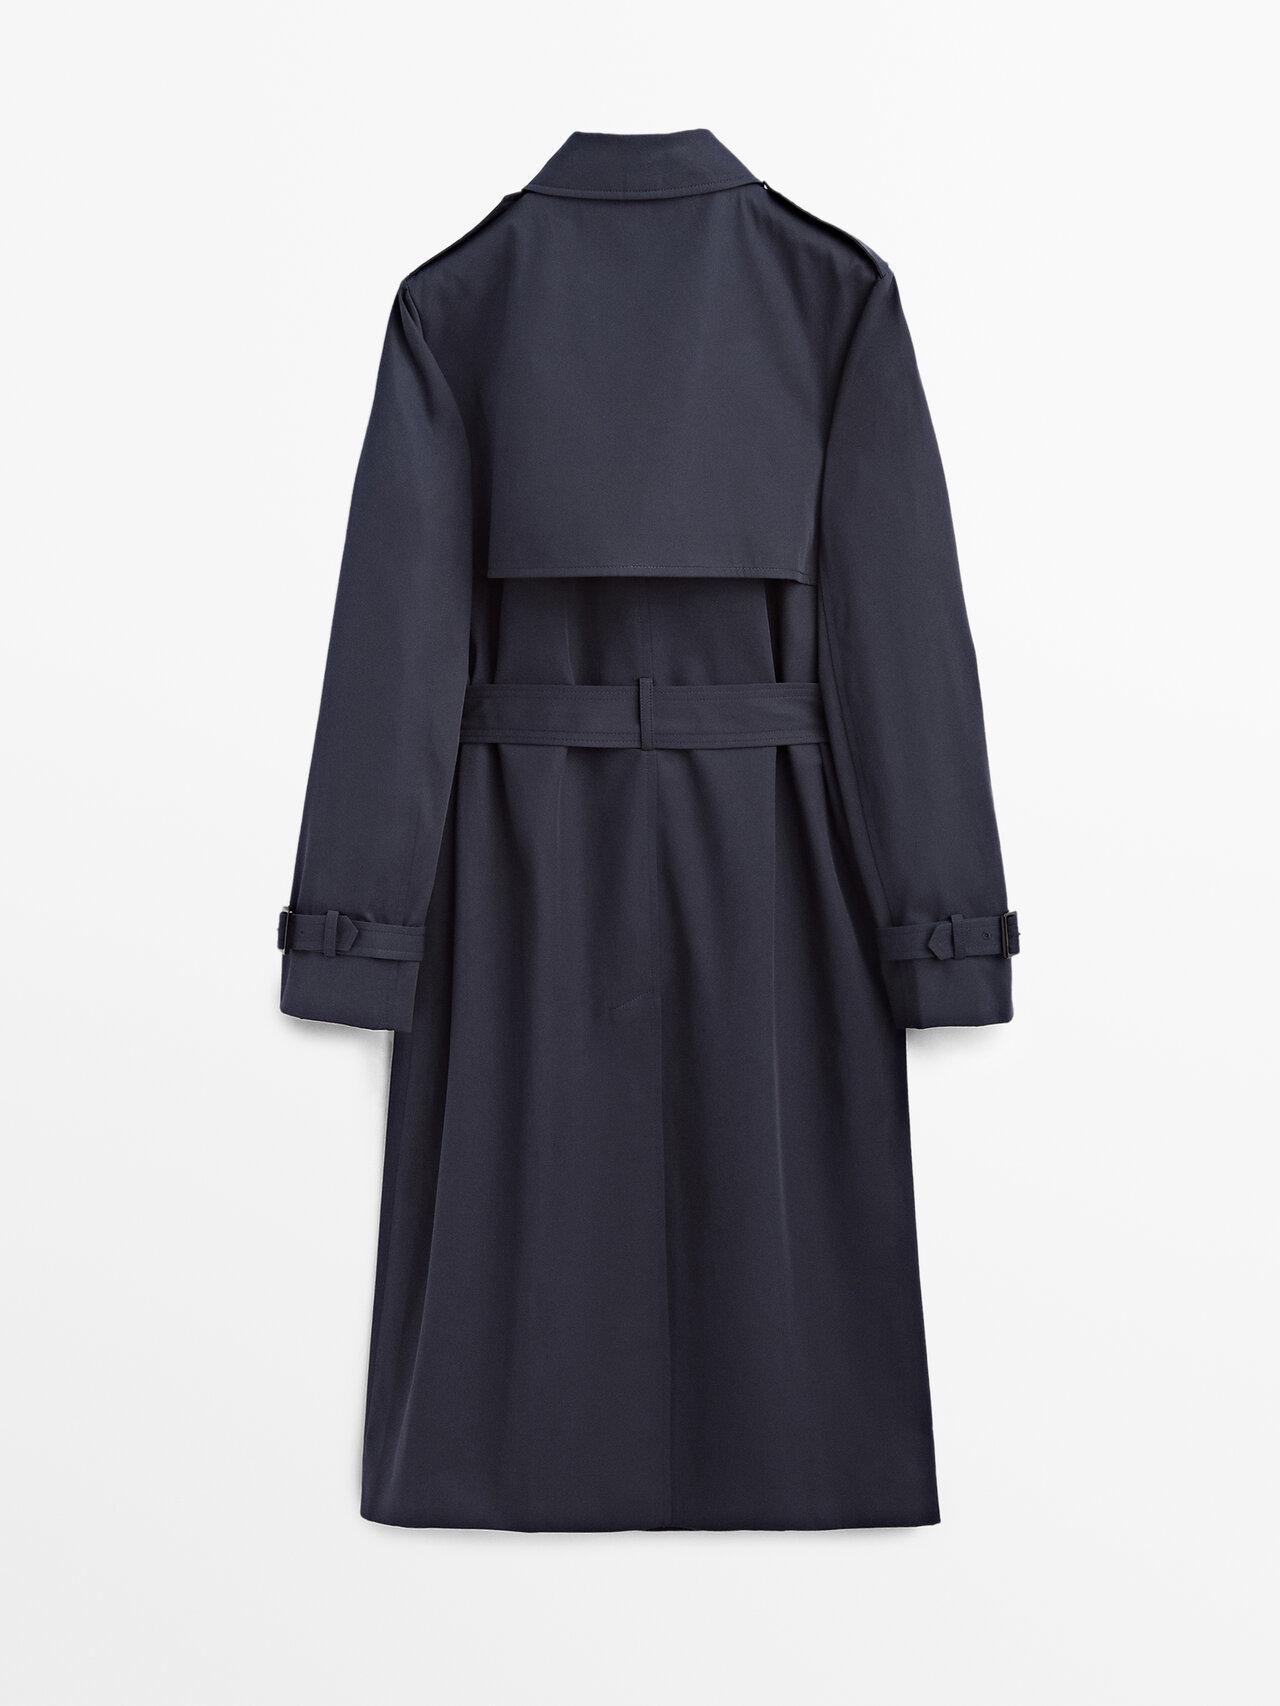 MASSIMO DUTTI Classic Cotton Trench Coat in Navy Blue (Blue) - Lyst